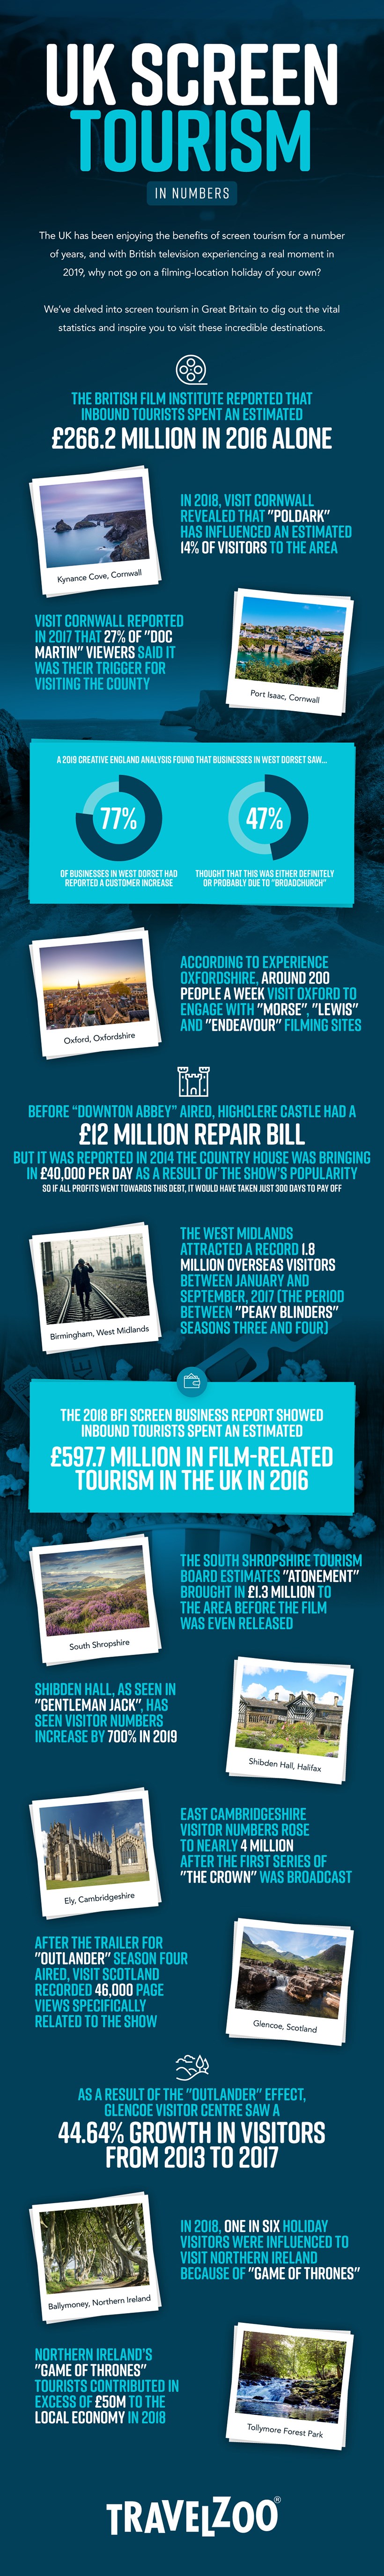 UK screen tourism in numbers